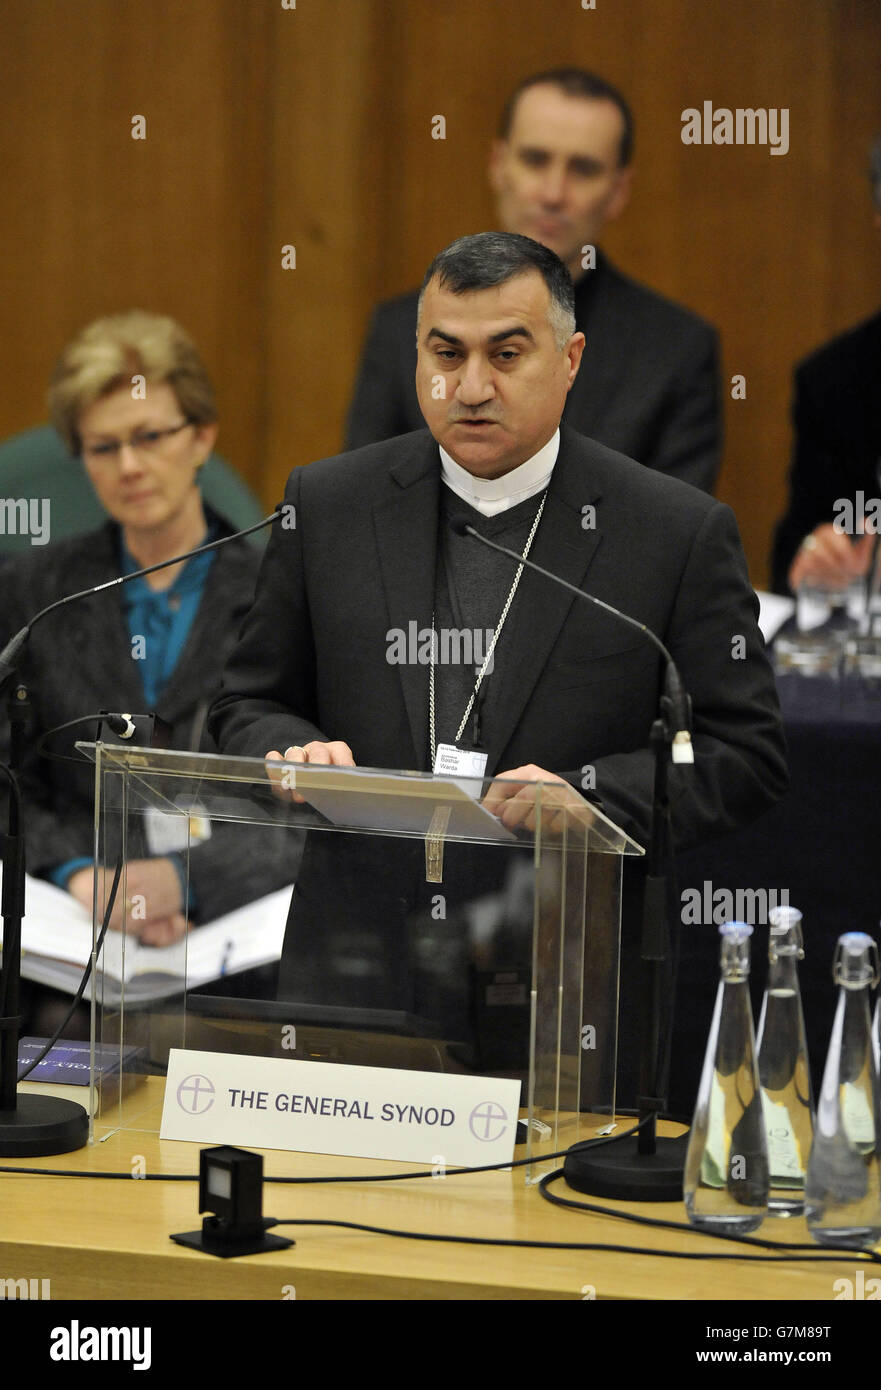 The Archbishop of the Chaldean Diocese of Erbil, Iraq, Bashar Warda (centre back), gives an address during the opening day of the General Synod at Church House, London. RESS ASSOCIATION Photo. Picture date: Tuesday February 10, 2015. See PA story RELIGION Synod. Photo credit should read: Nick Ansell/PA Wire Stock Photo